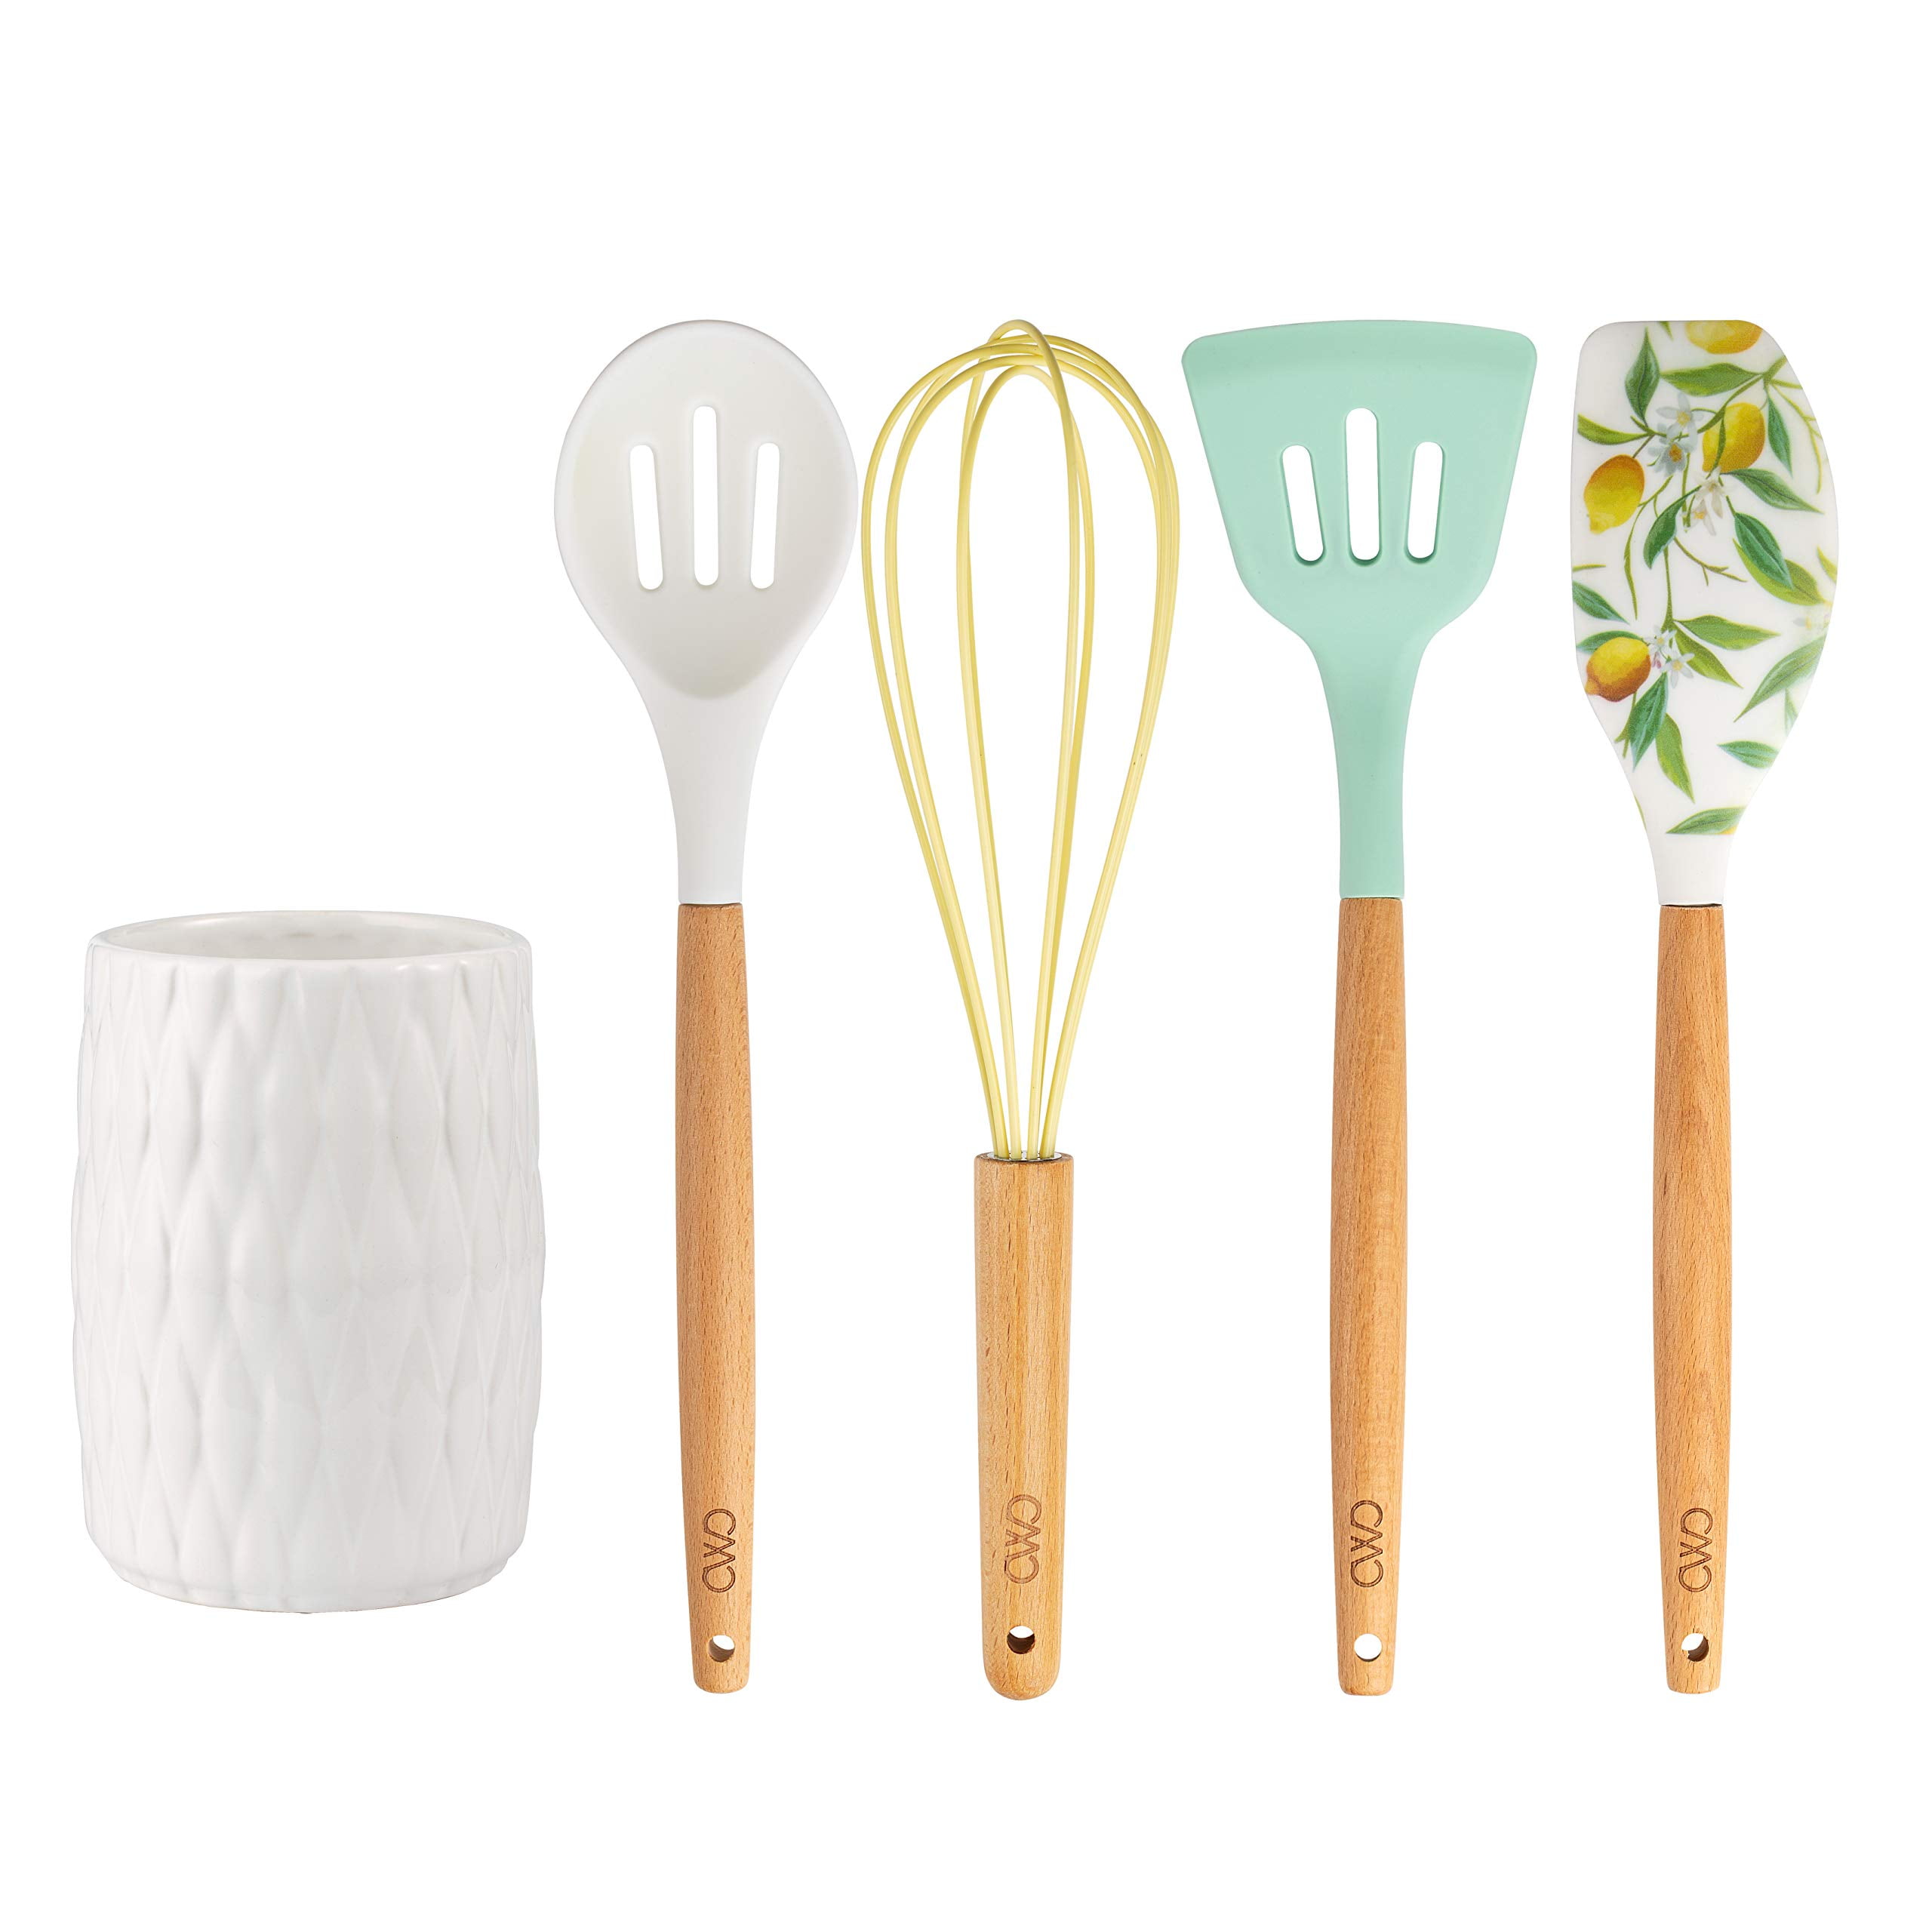 Buy 5-Piece Silicone Cooking Set from Cook'n'Chic